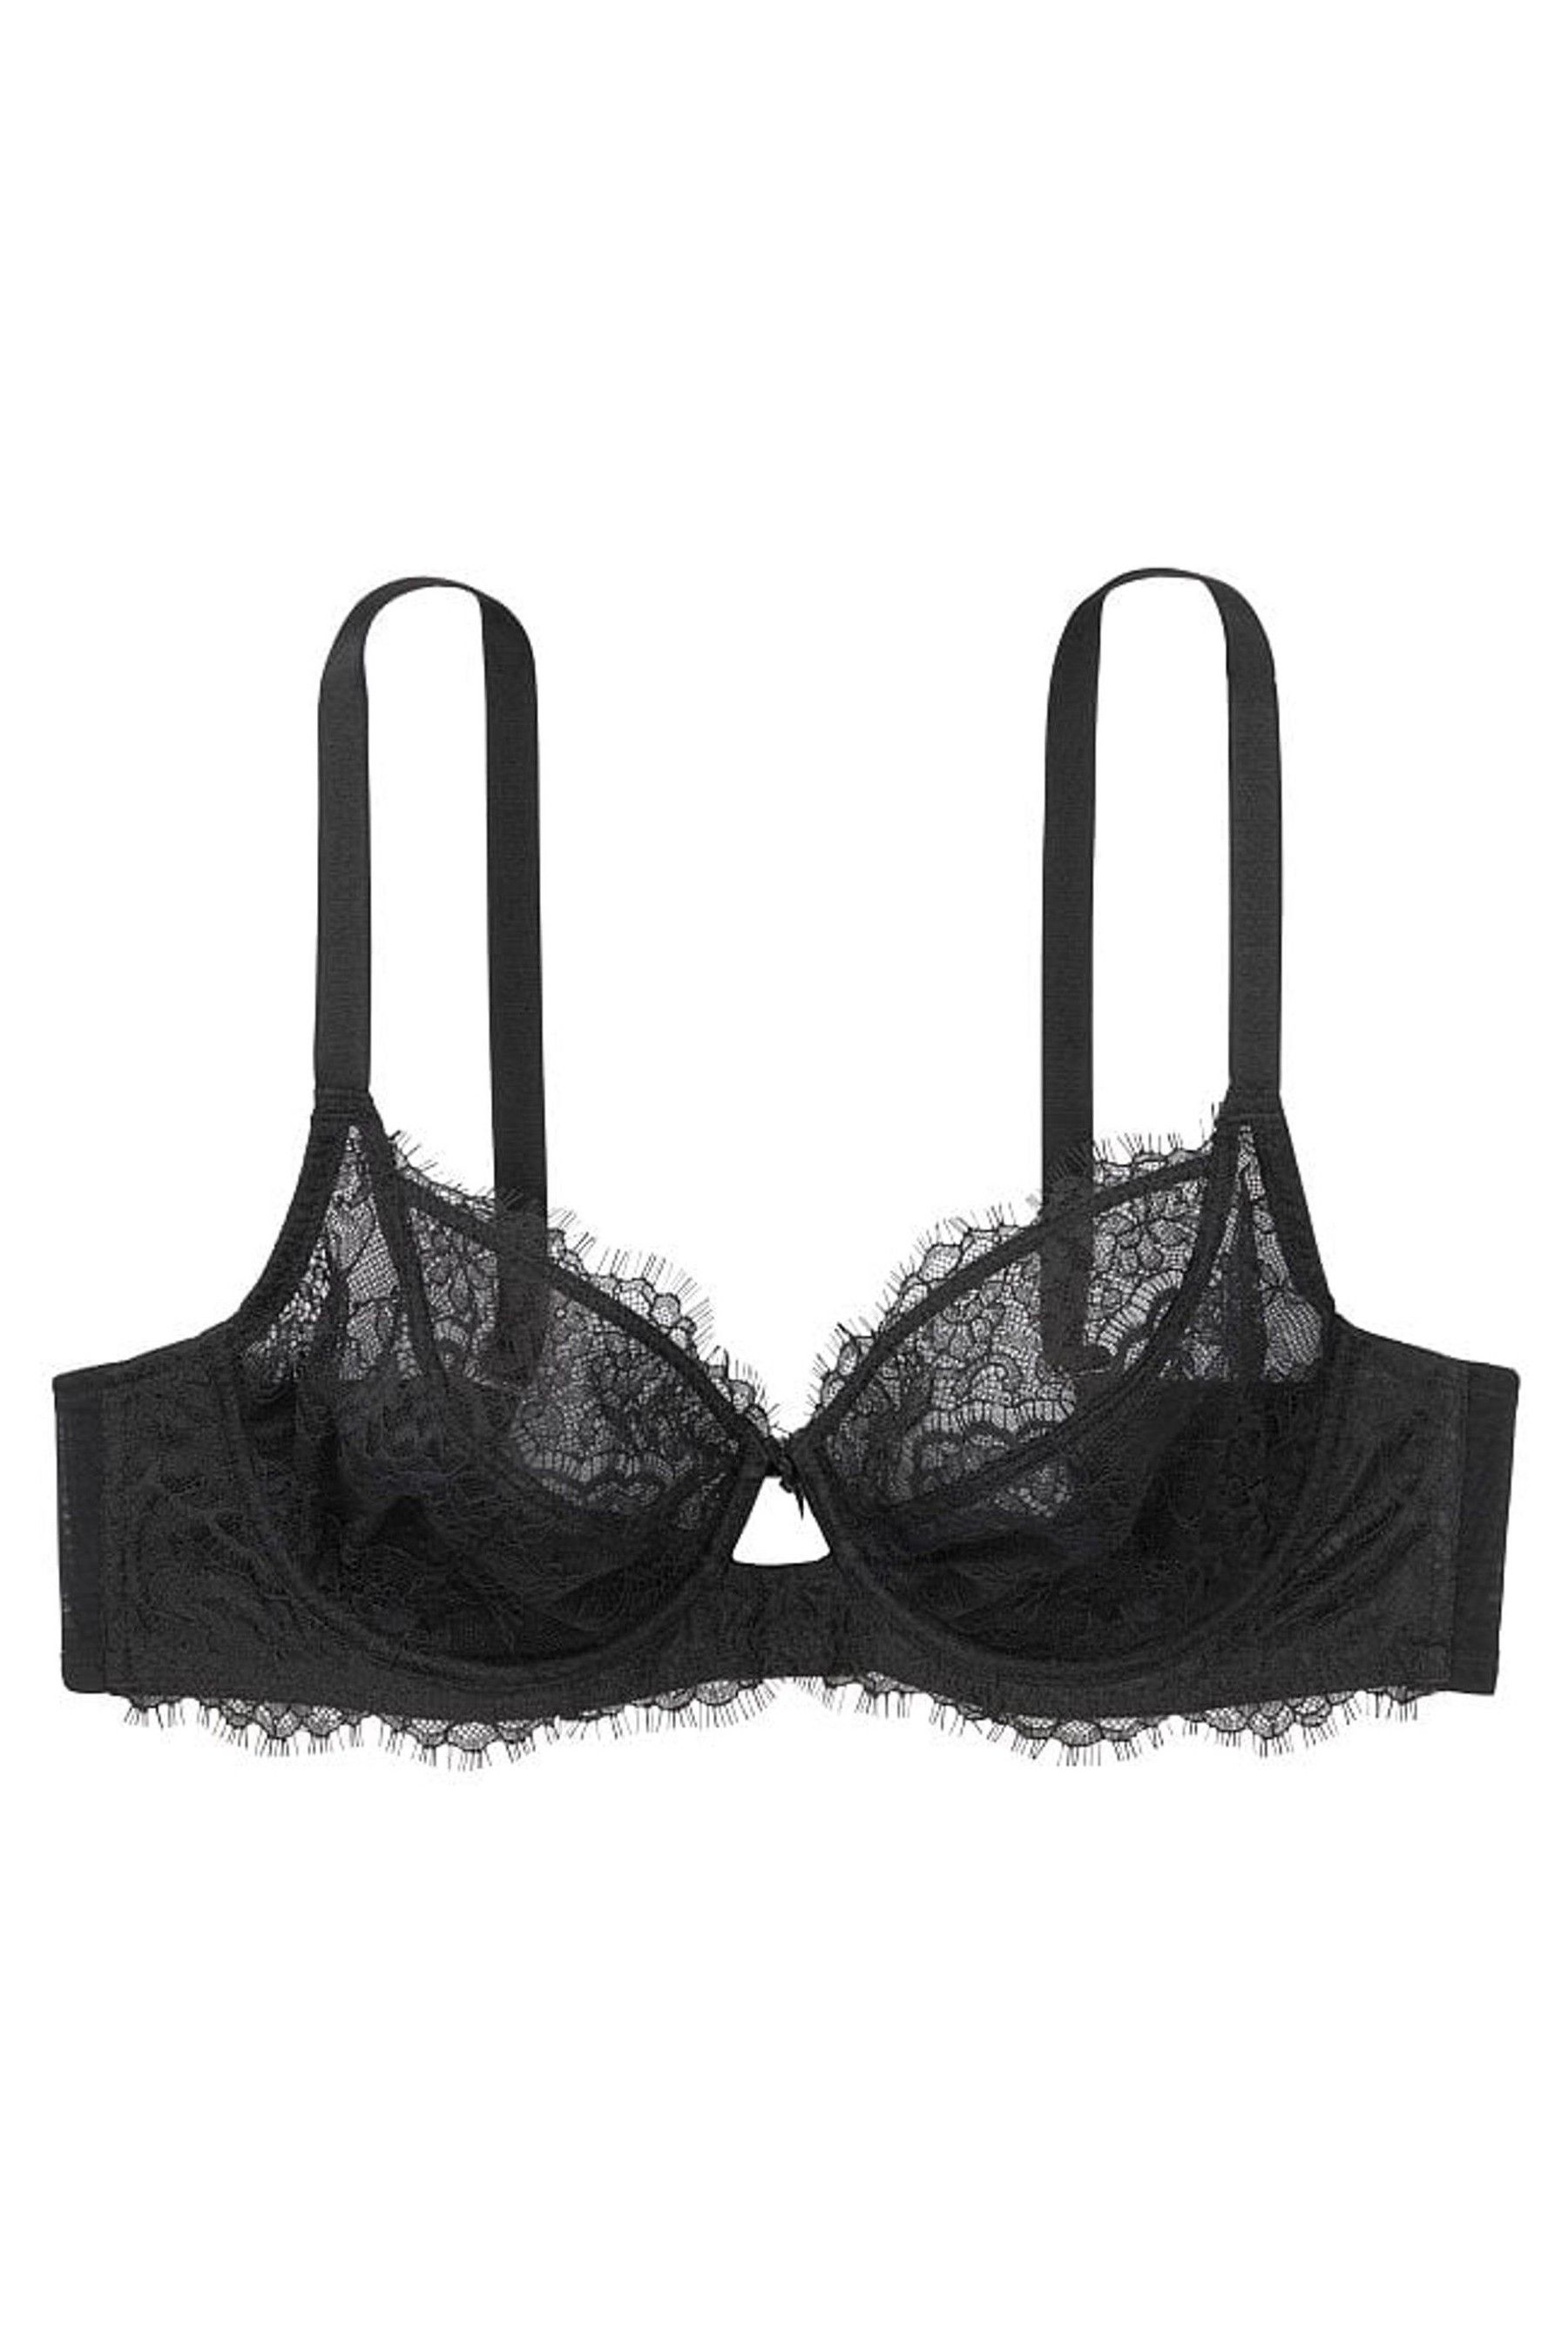 Buy Victoria's Secret Black Lace Full Cup Unlined Bra from the Next UK ...